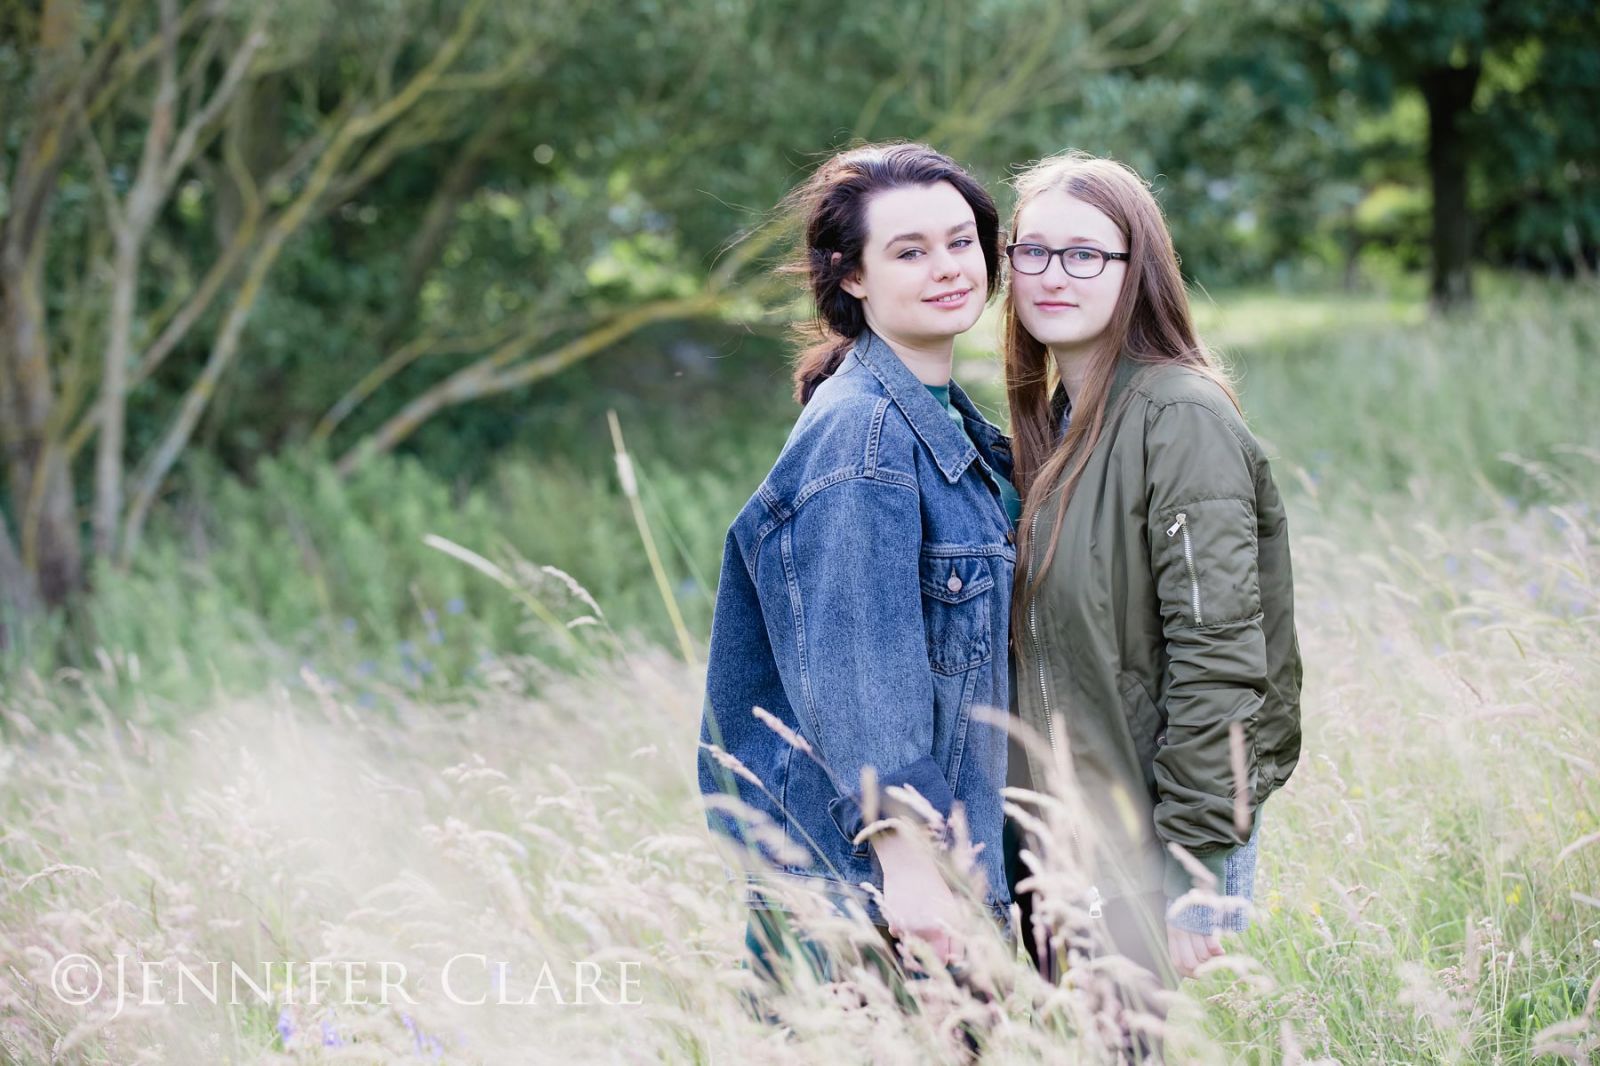 Sisters photographed in long grass in a Derby Park